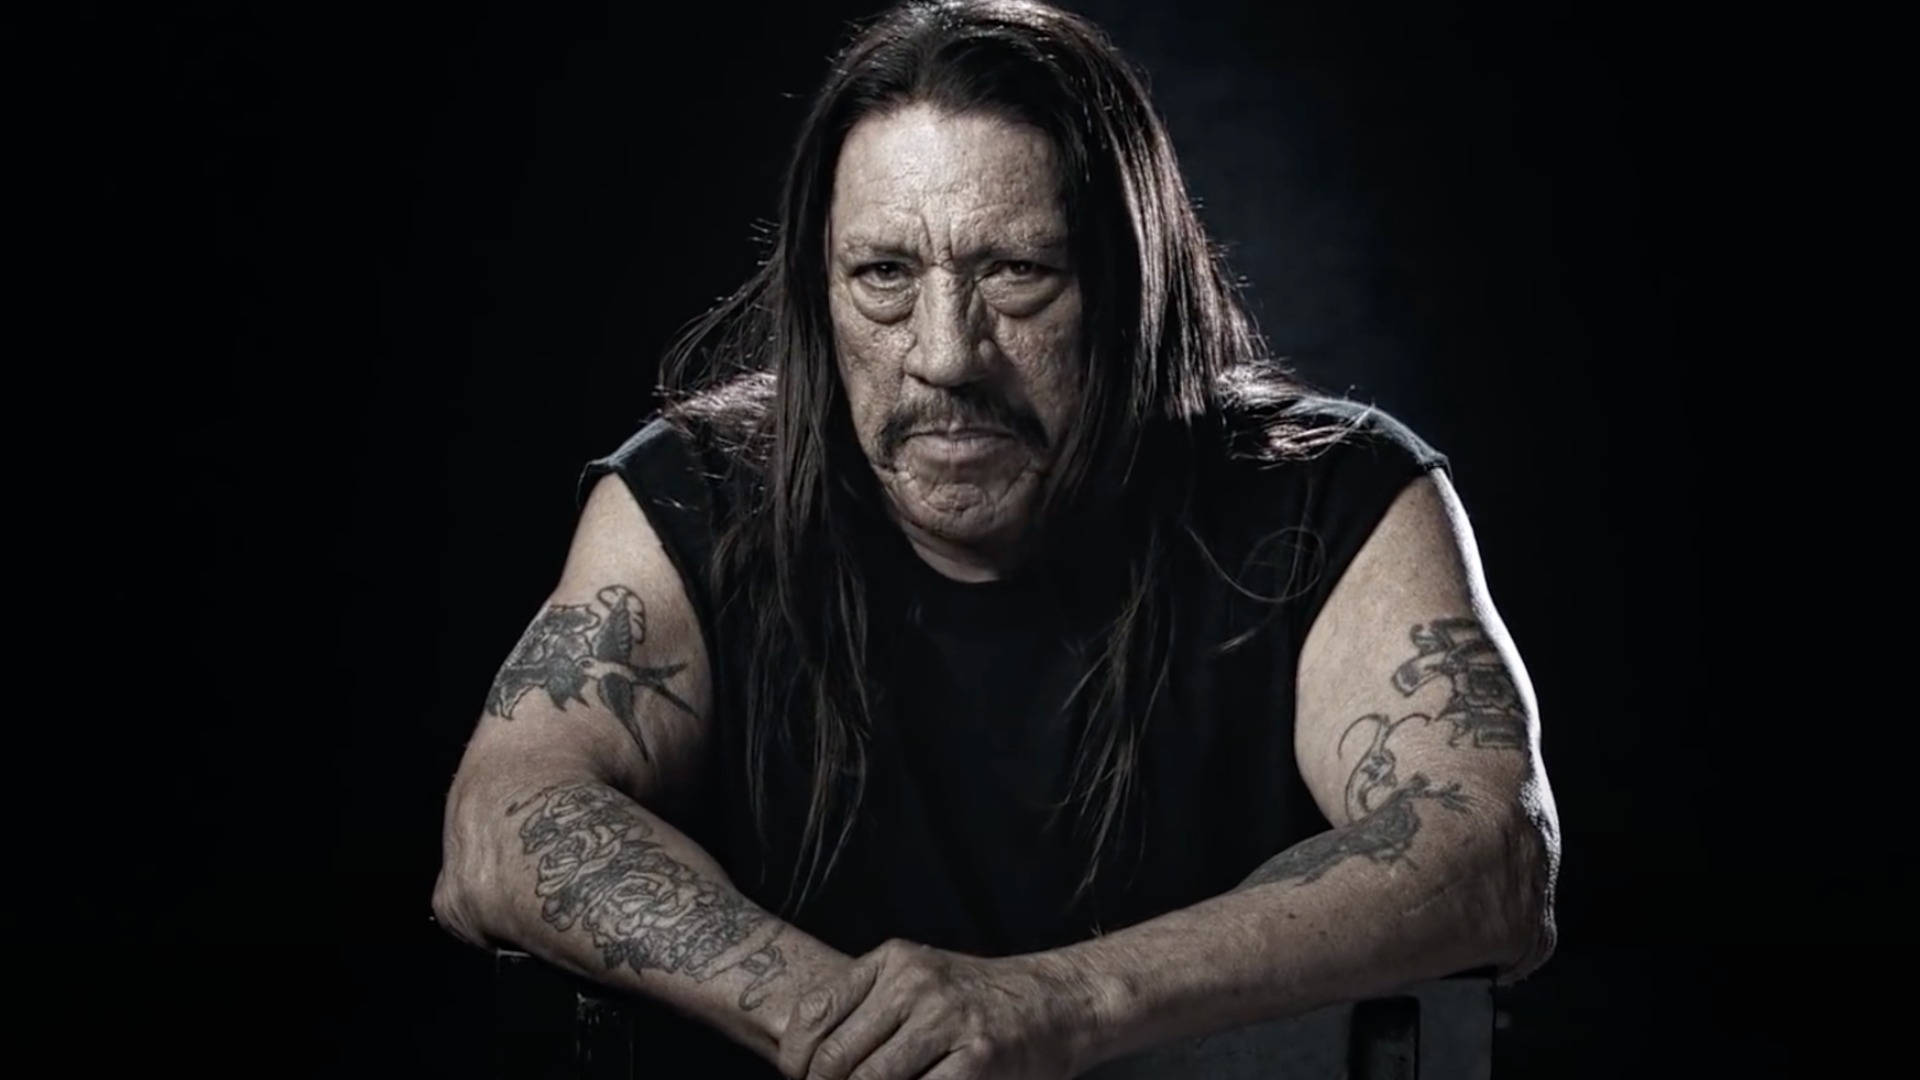 Danny Trejo With Full Sleeve Tattoos Background